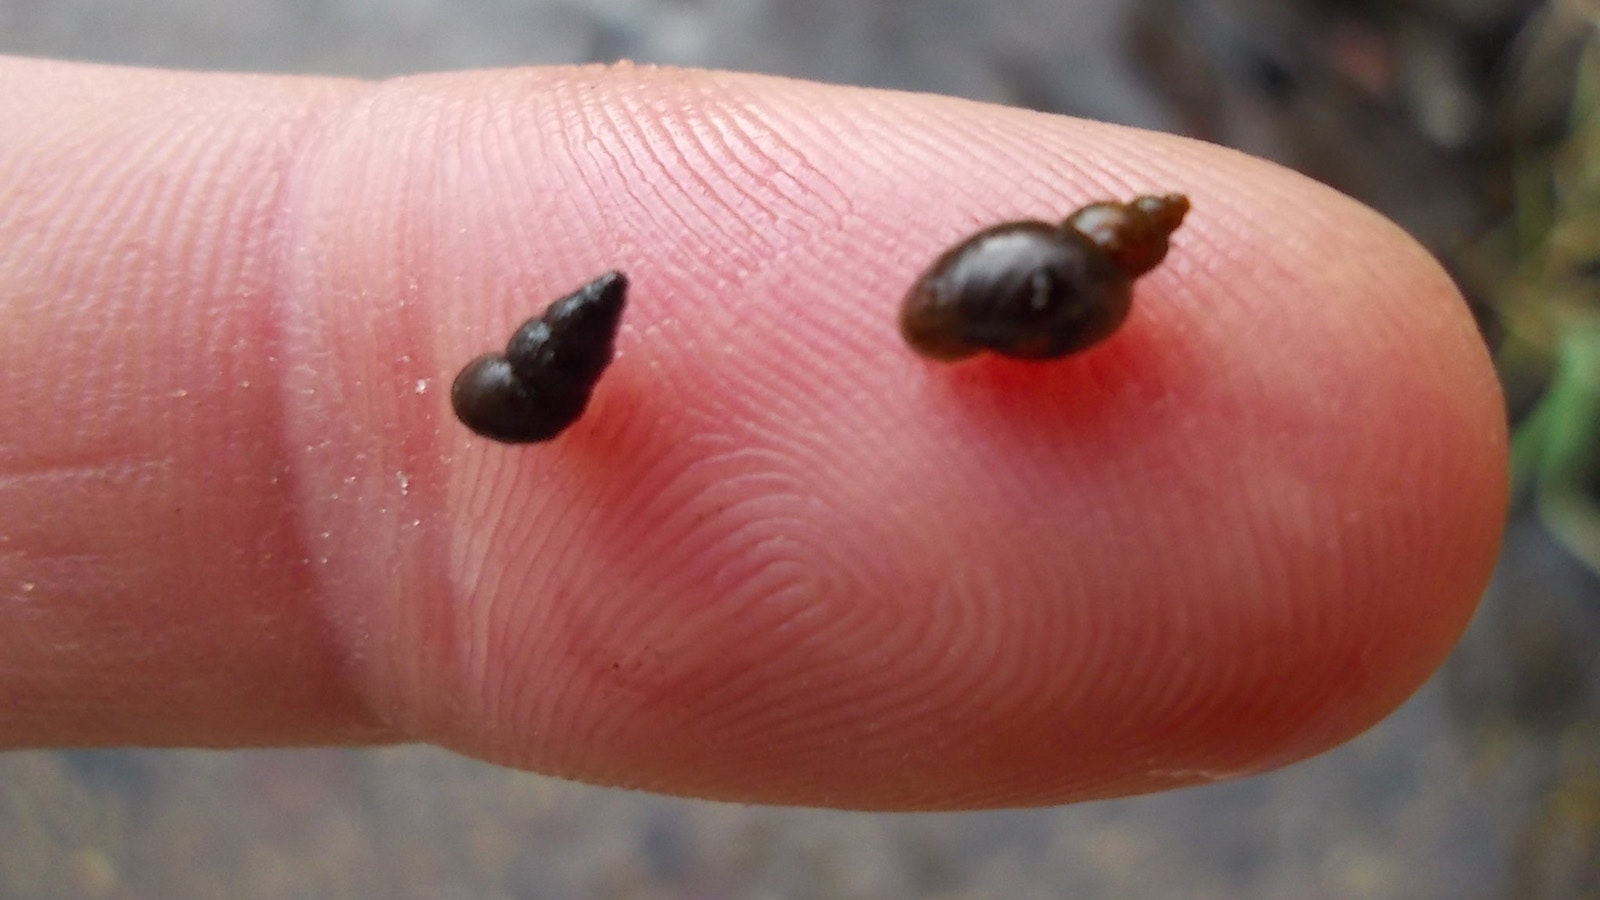 New Zealand mud snails are tiny, about 1 mm long.